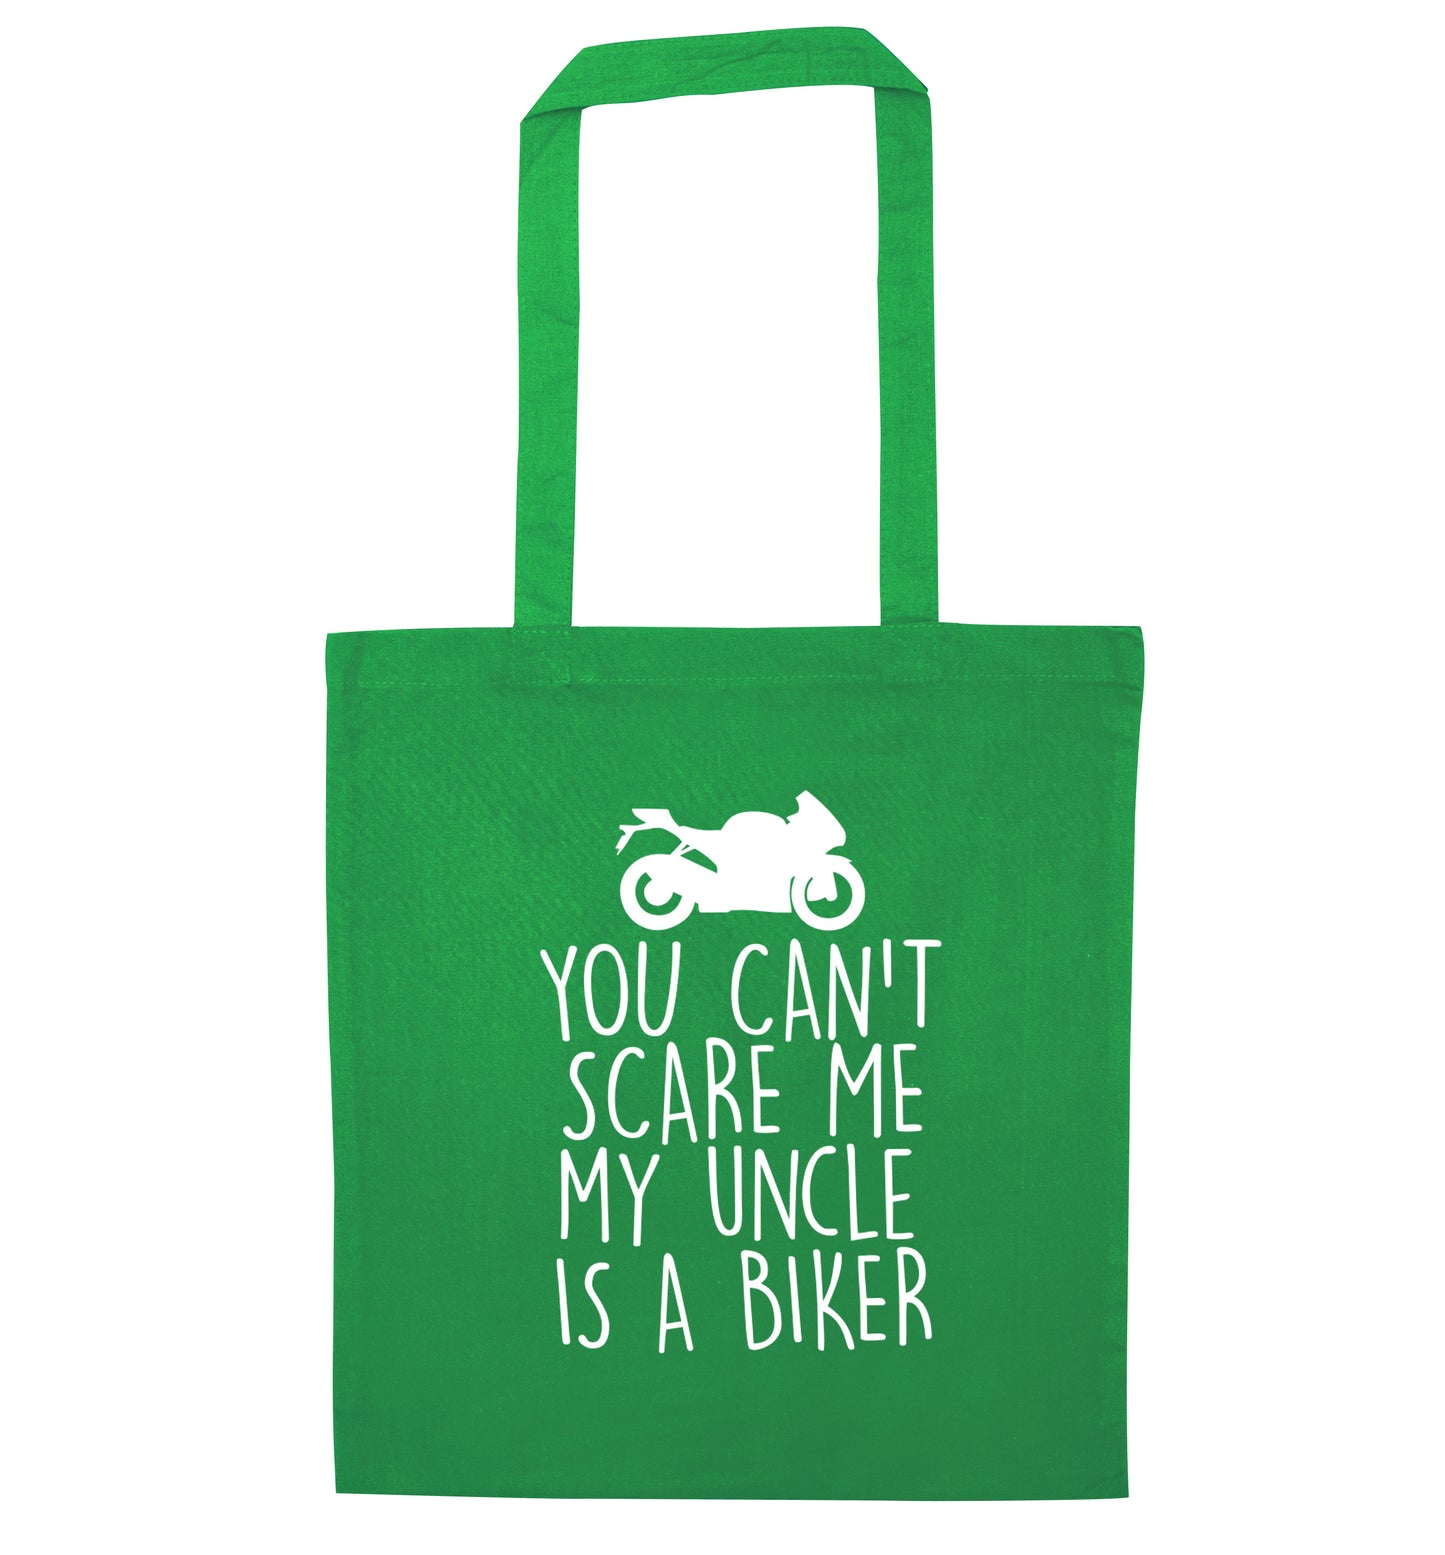 You can't scare me my uncle is a biker green tote bag